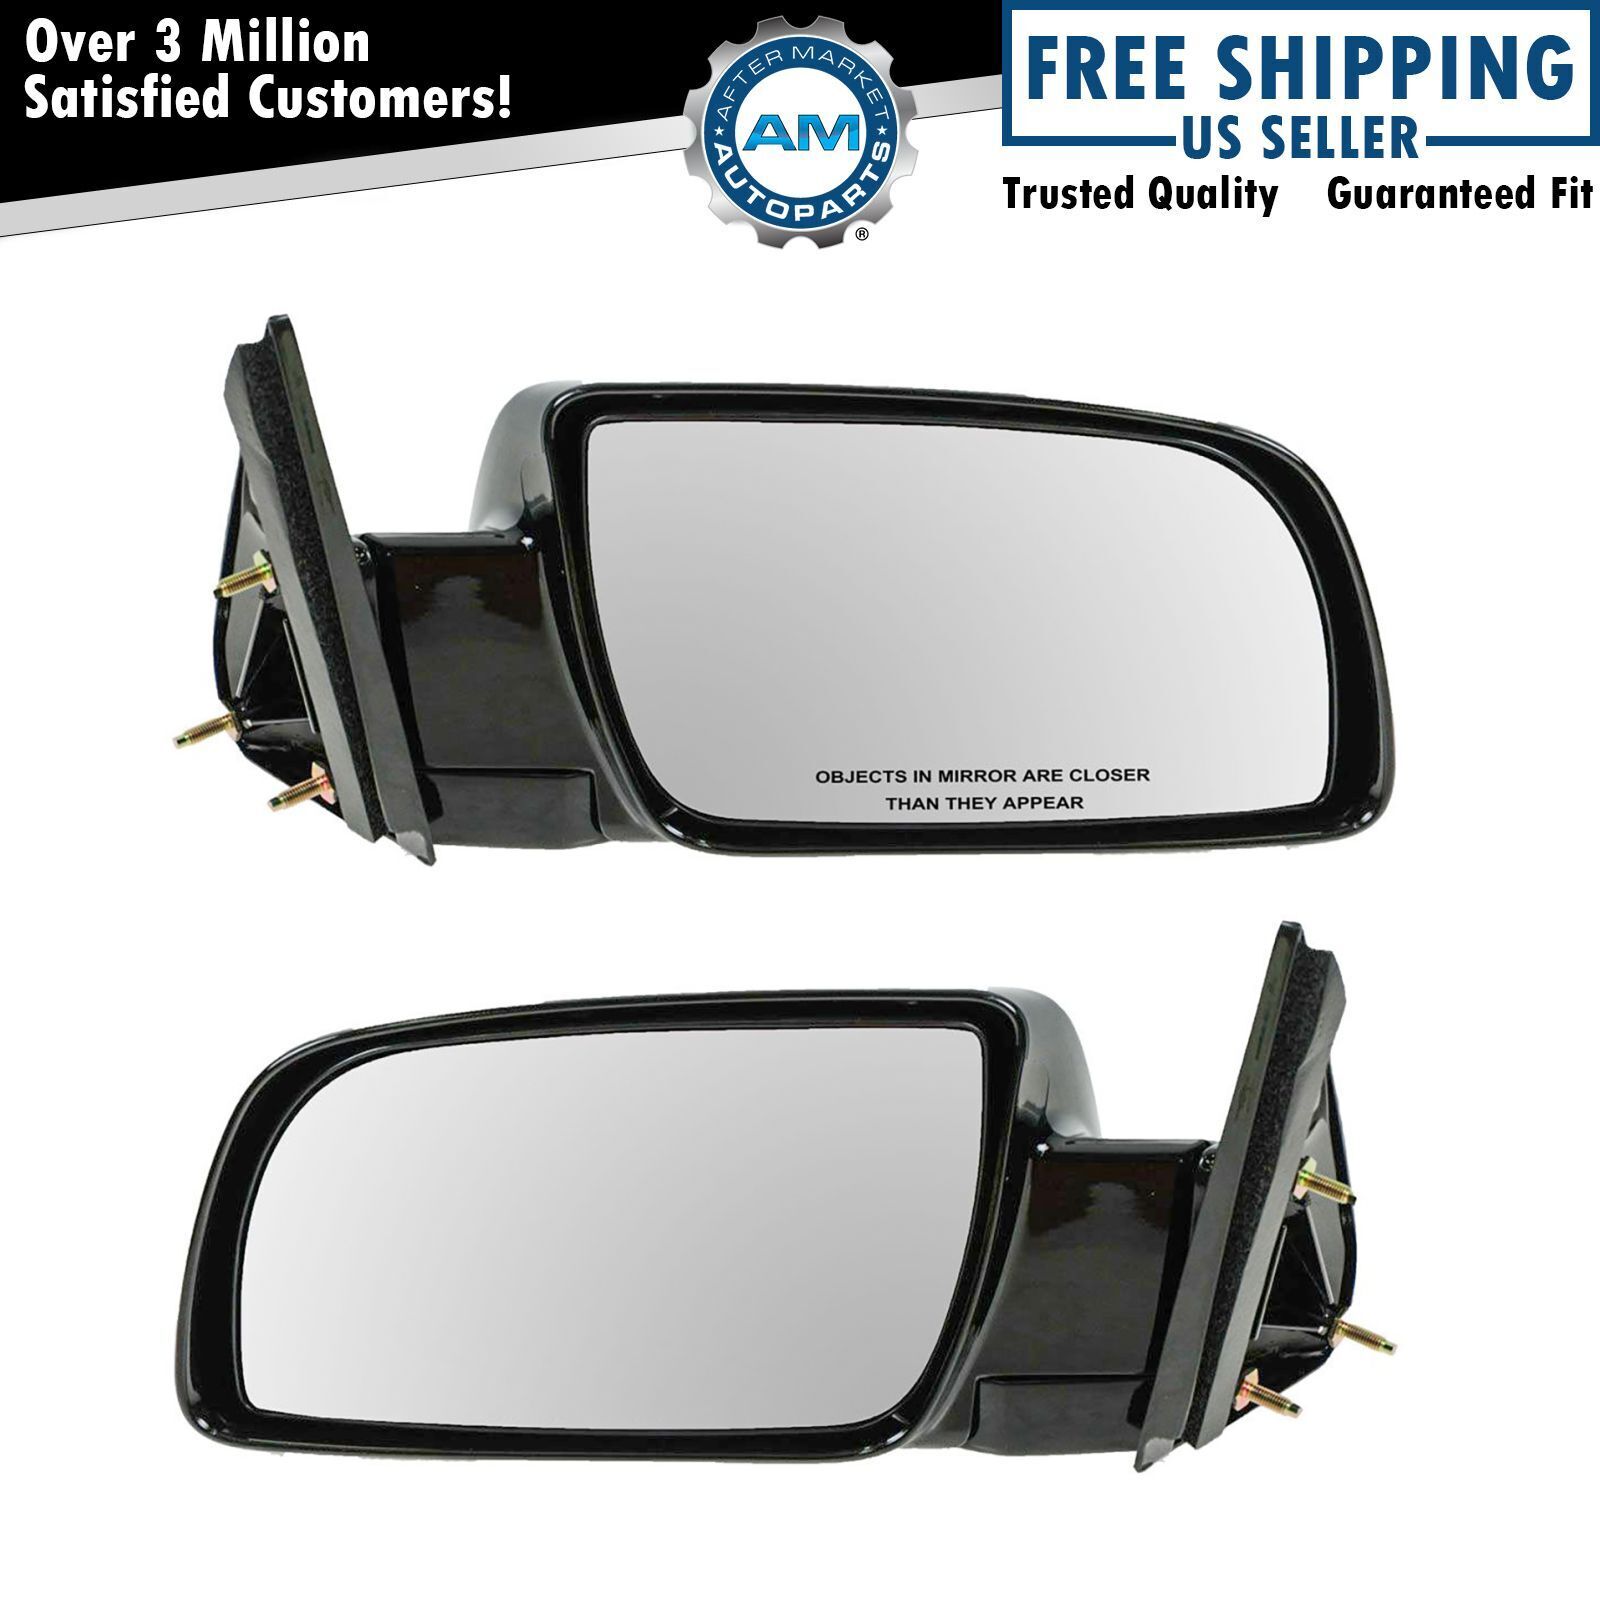 Manual Black Side Mirrors Left LH & Right RH Pair Set of 2 for Pickup Truck